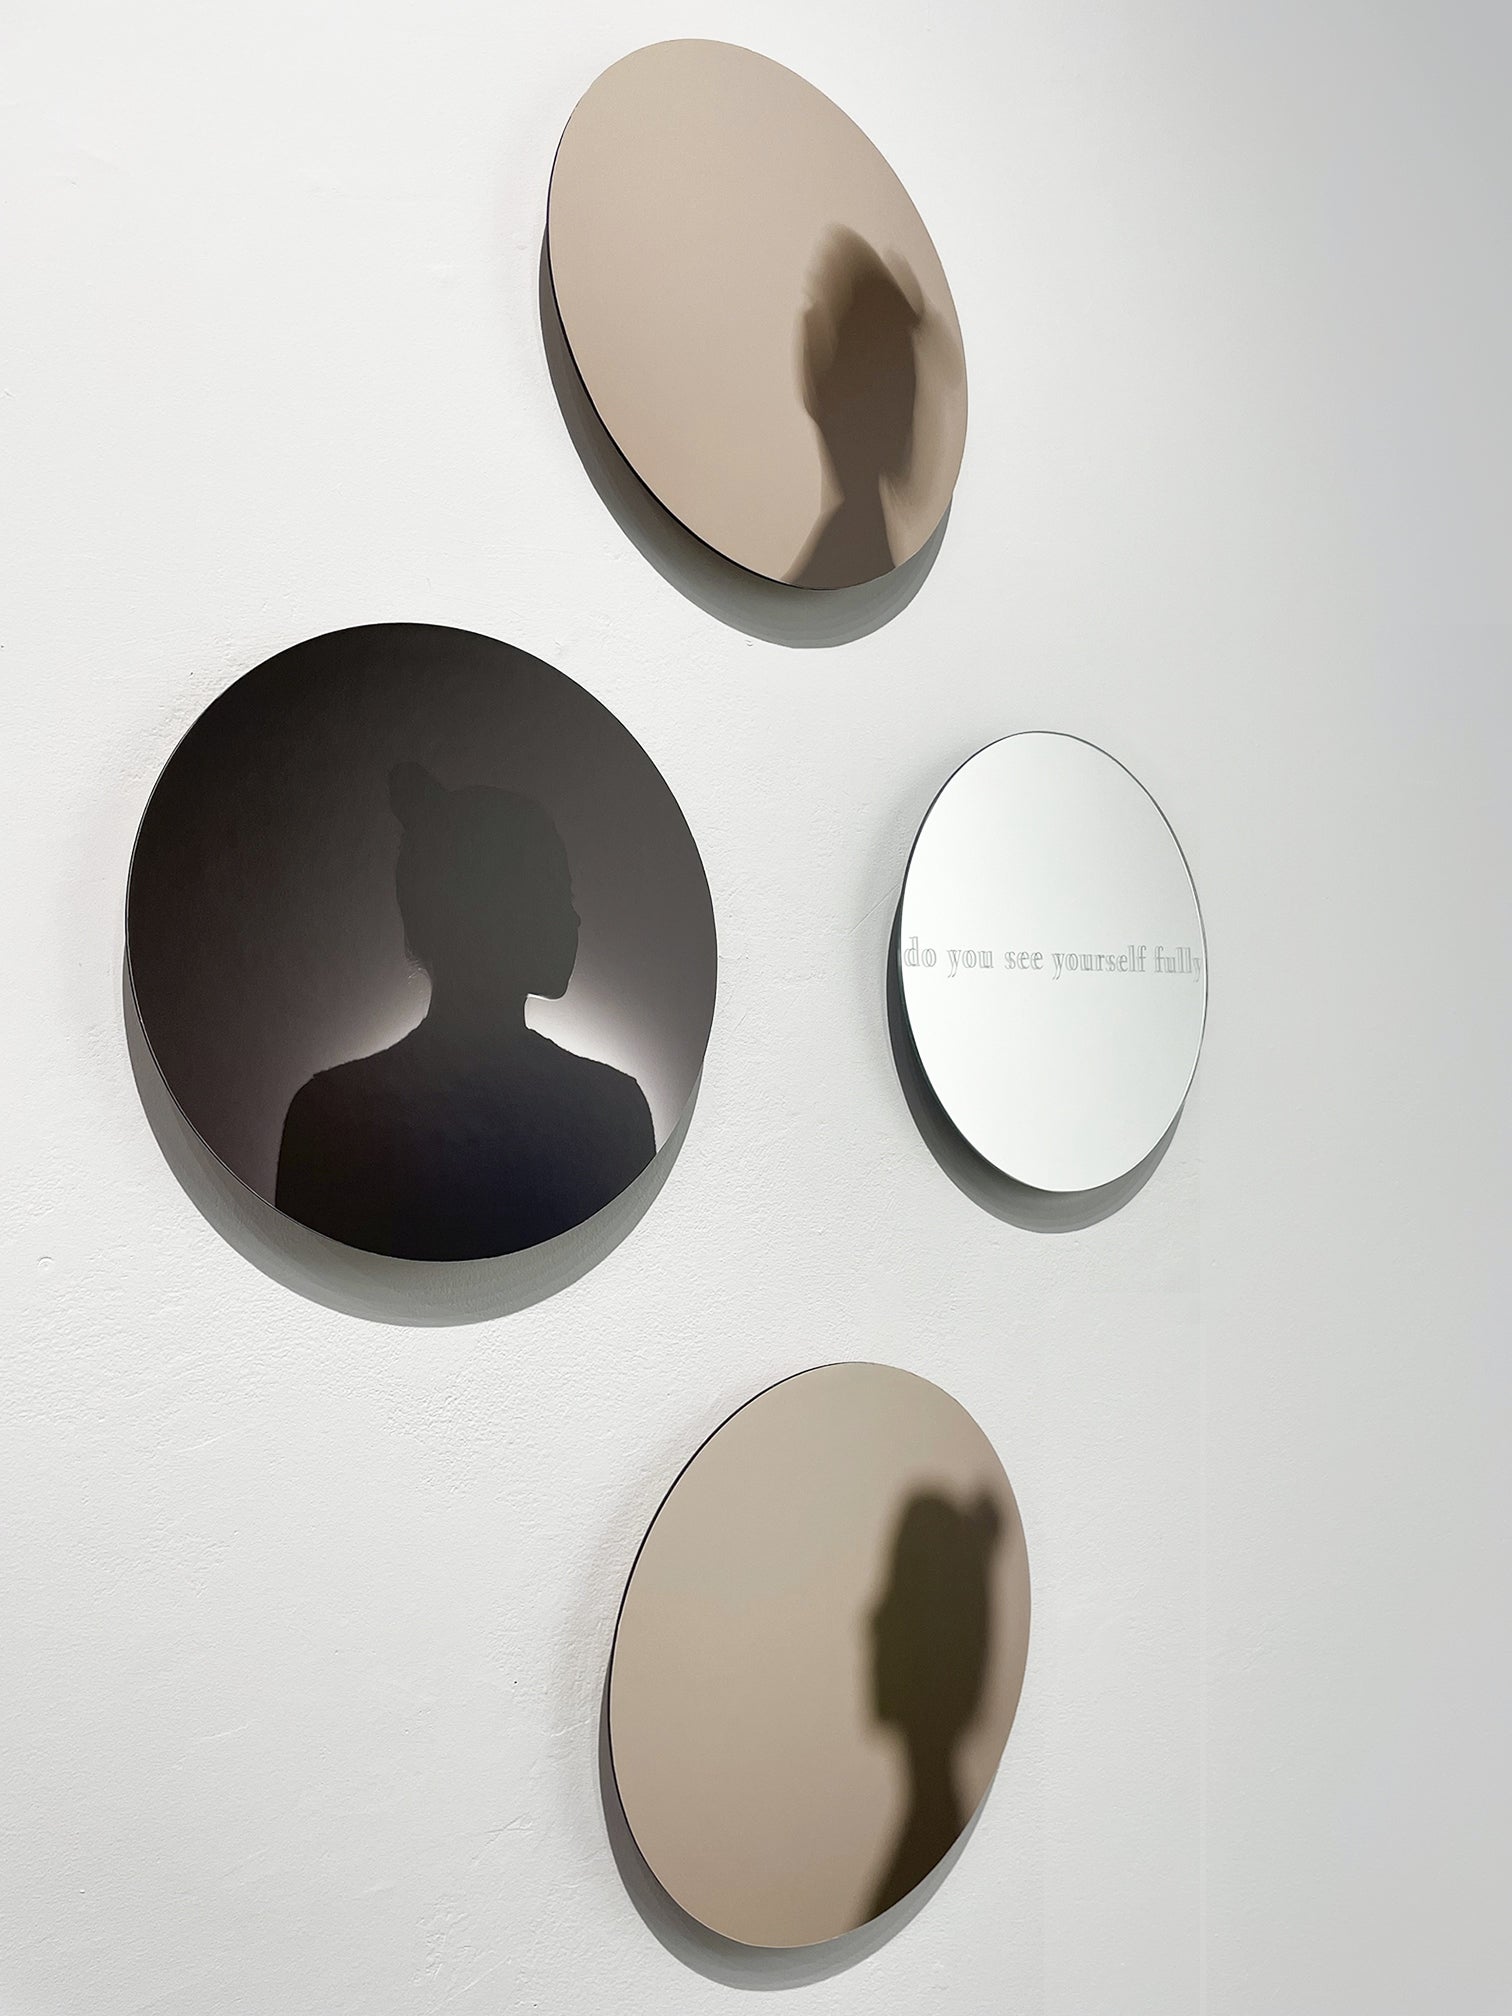 Art installation of 4 circular glass works with woman's portrait in silhouette and text "do you see yourself fully"